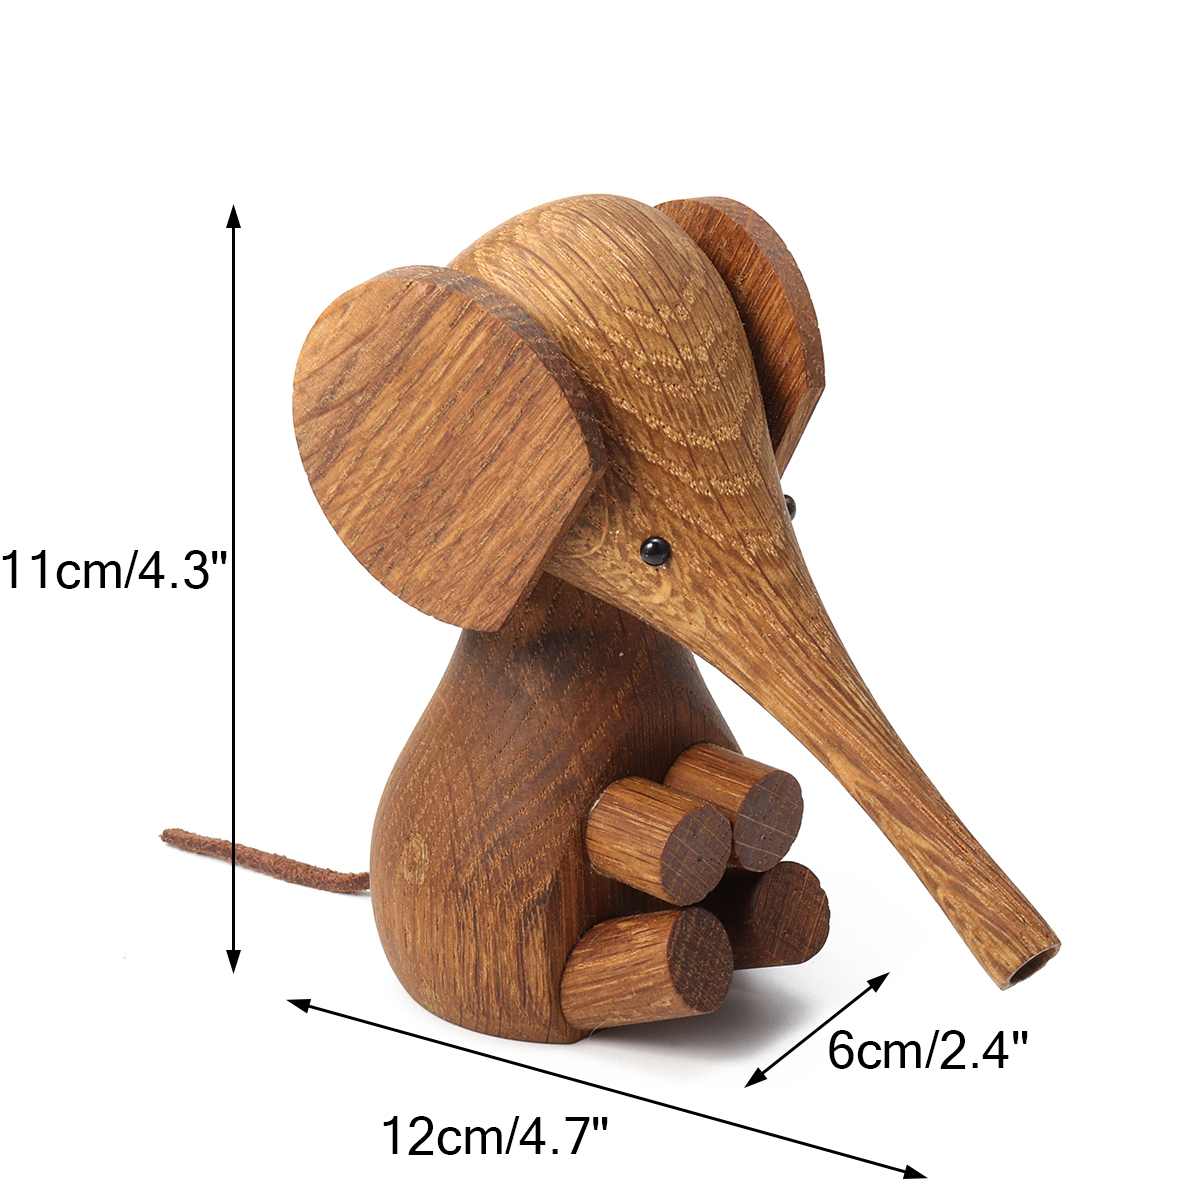 Adjustable-Handicraft-Elephant-Wooden-Animal-Doll-Smooth-Surface-Home-Decorations-Gift-1640775-10